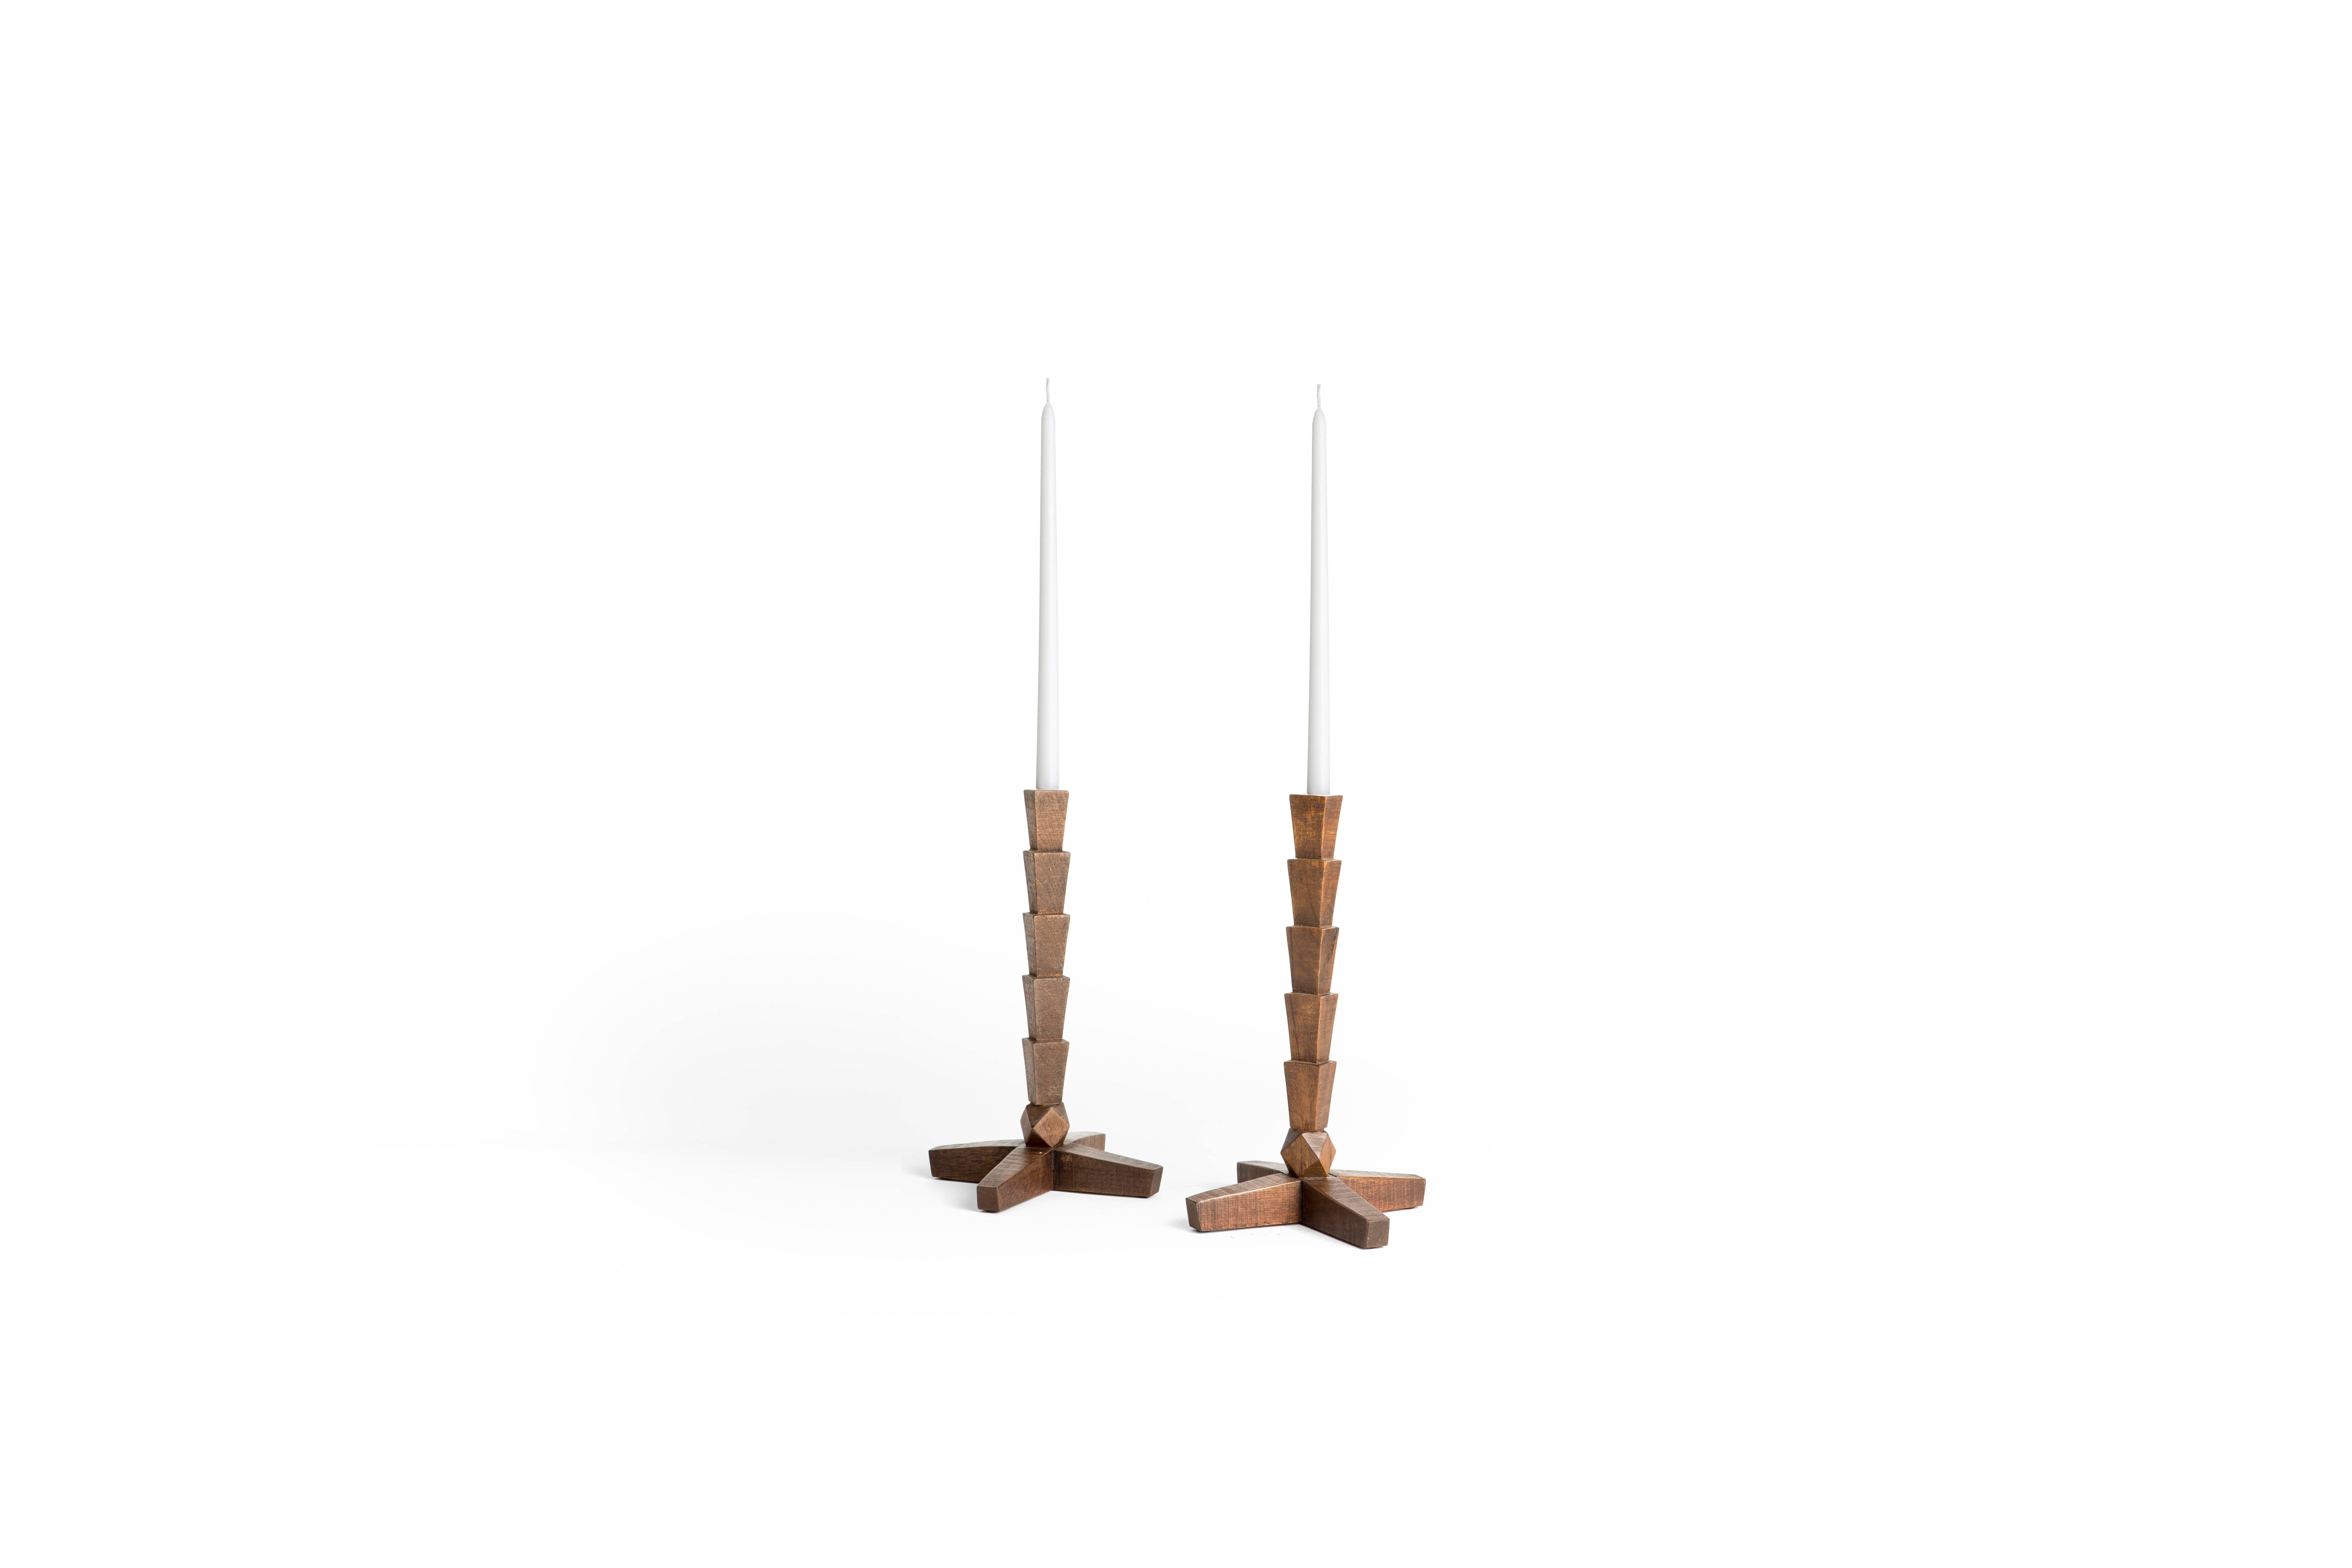 Made from white oak with a dark stain, this is a unique edition from Erik Gustafson. Candlesticks built for tiny tapered sized candles, appropriate candle spec will be provided. 

In stock and available. 

Gustafson’s inspiration stems from a